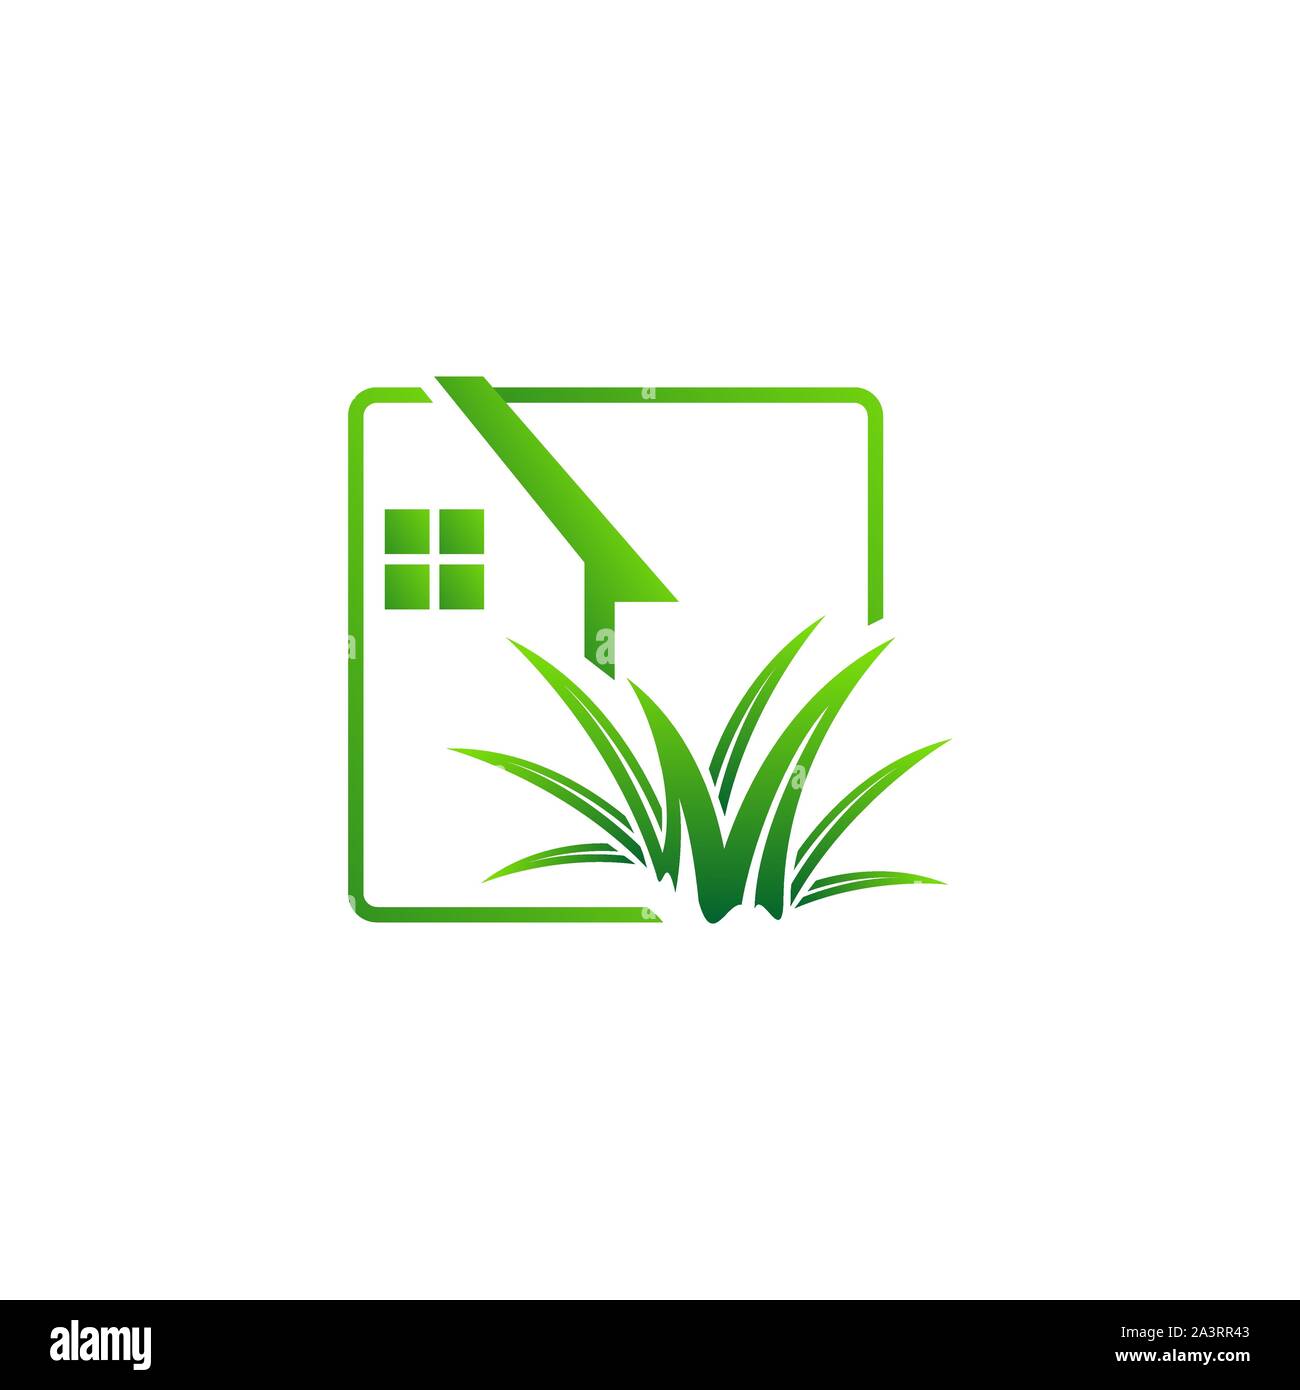 gardening landscaping logo design vector lawn and house illustrations Stock Vector